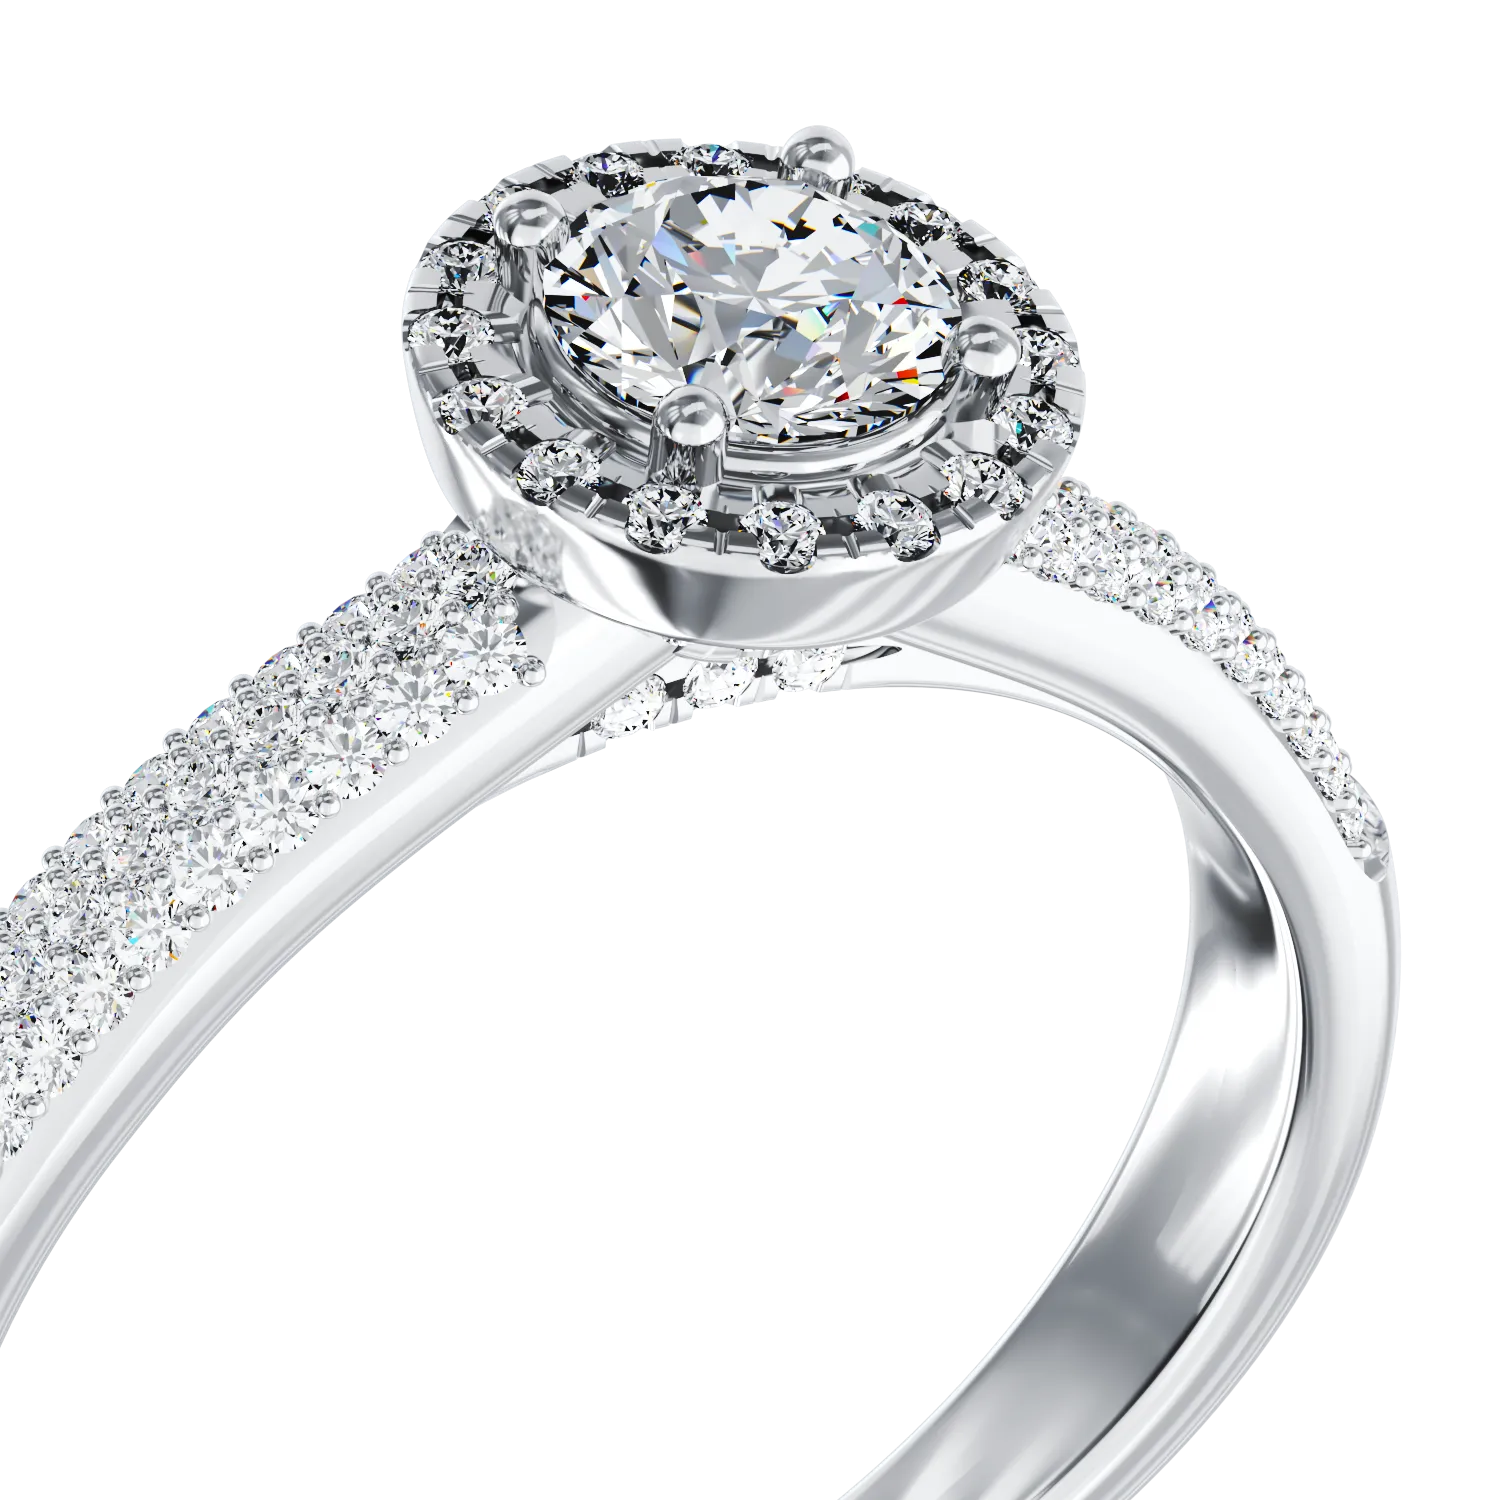 18K white gold engagement ring with 0.29ct diamond and 0.42ct diamonds